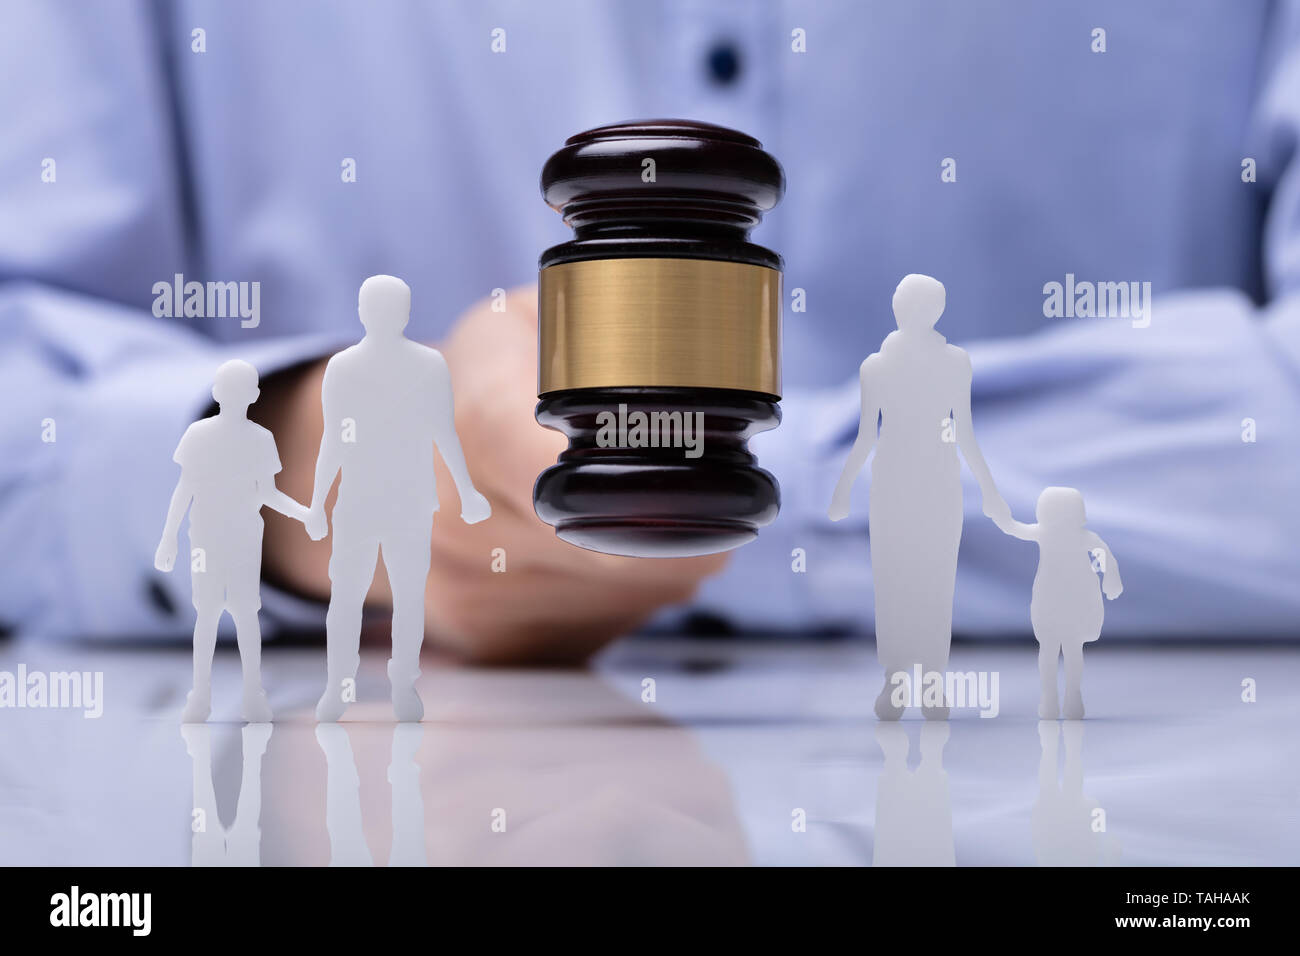 Close-up Of A Judge Striking Gavel Between Family Figure Cut Out Over Reflective Desk Stock Photo